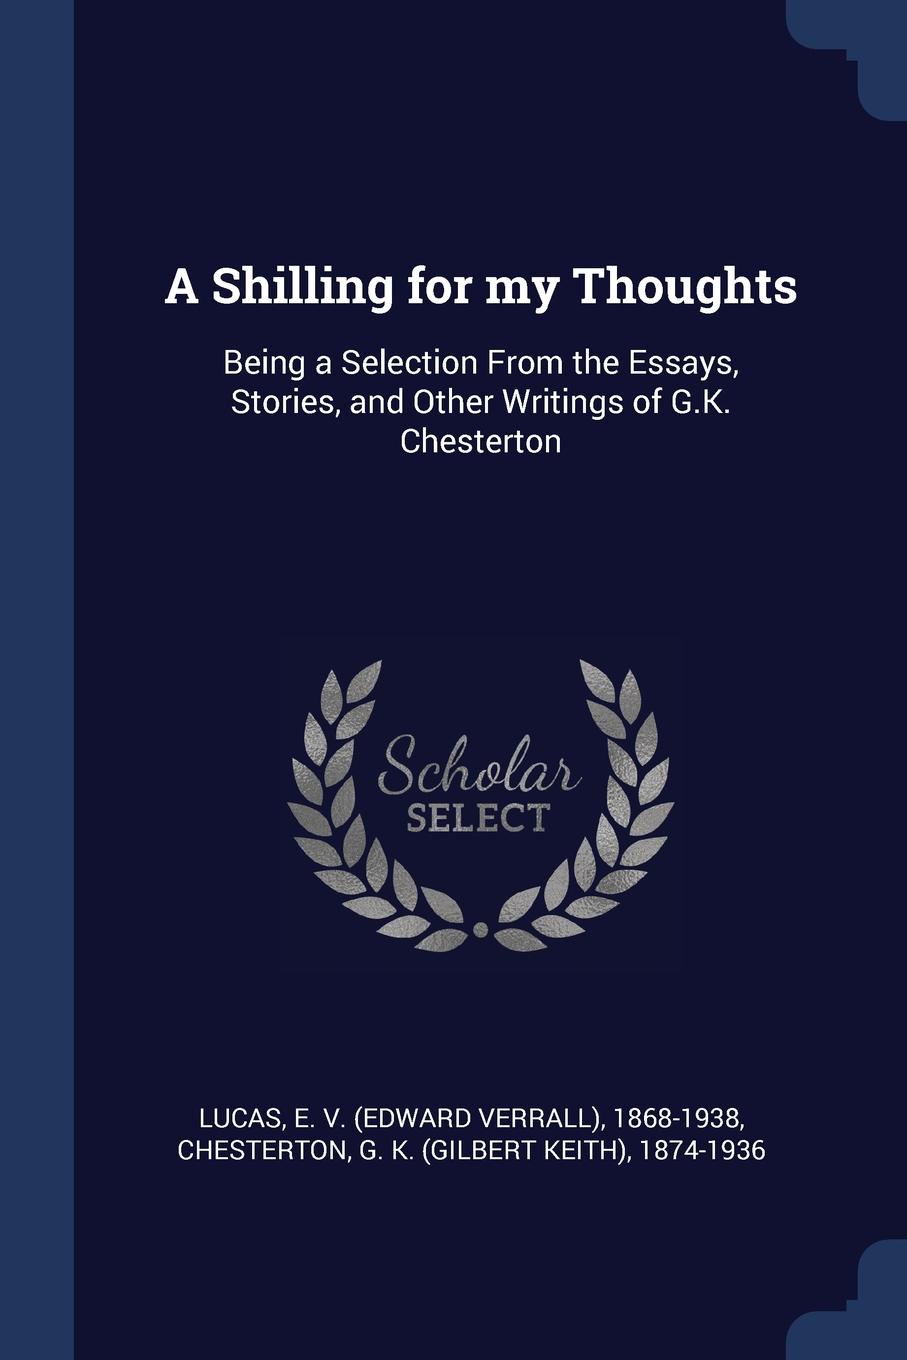 A Shilling for my Thoughts. Being a Selection From the Essays, Stories, and Other Writings of G.K. Chesterton